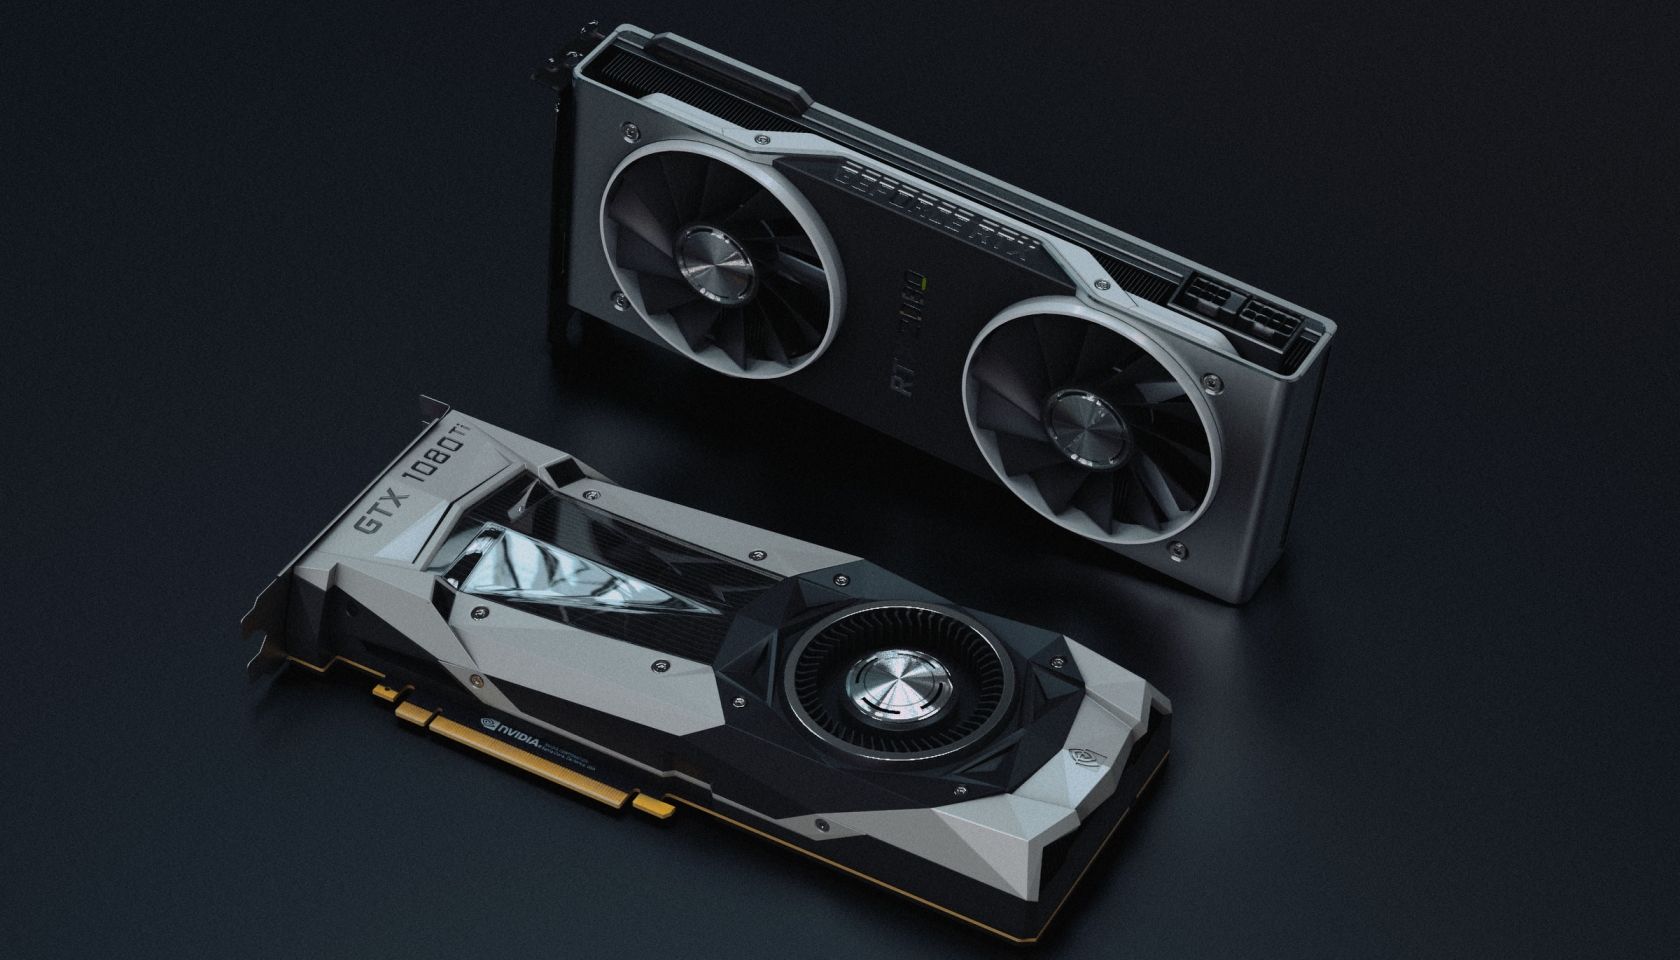 GTX 1080 Ti and RTX 2080 graphics cards